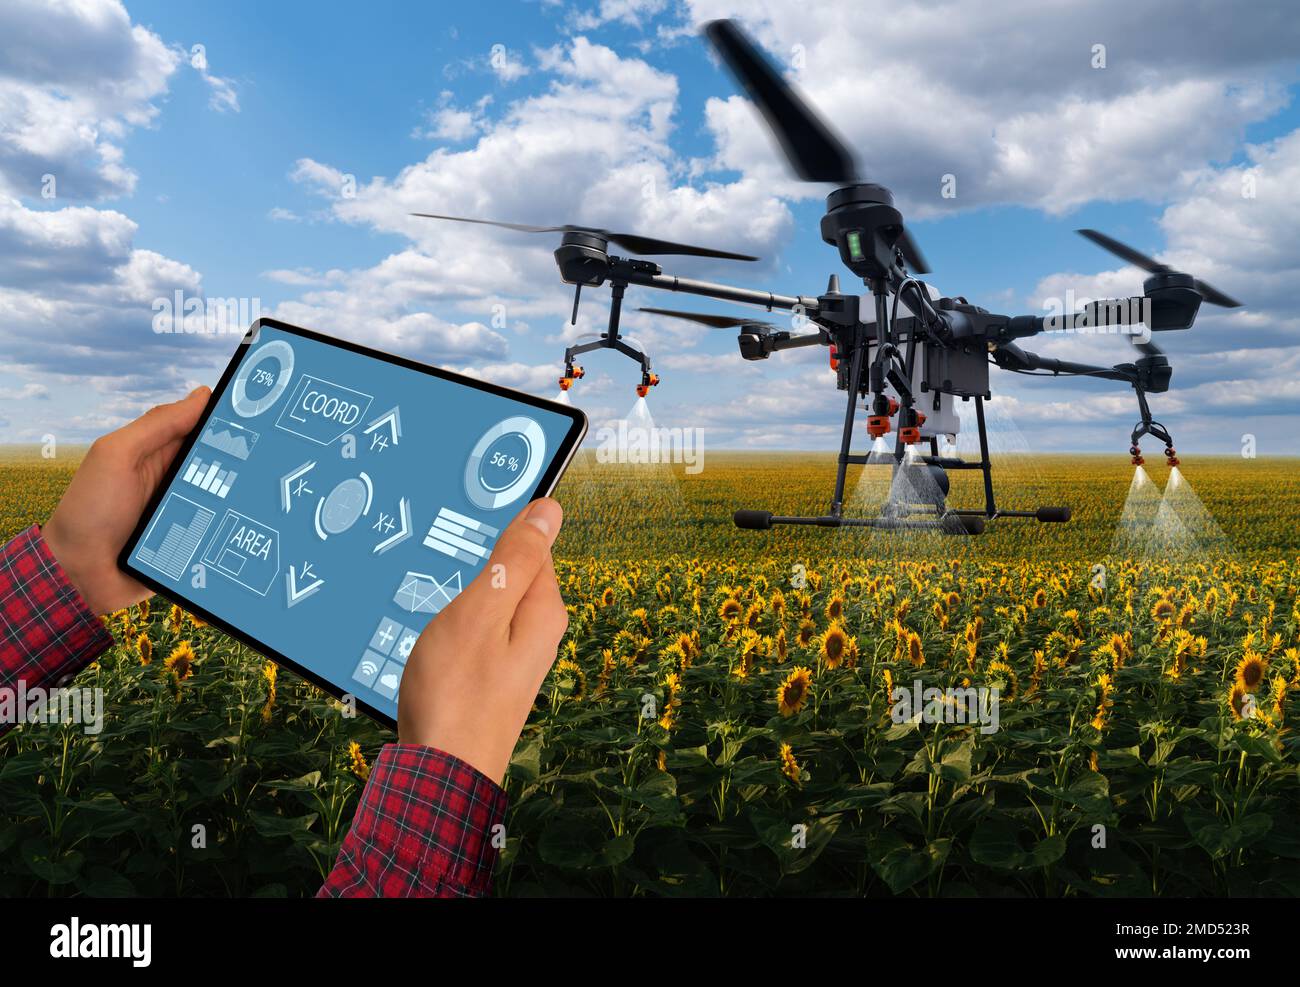 Farmer controls drone sprayer with a tablet. Smart farming and precision agriculture Stock Photo